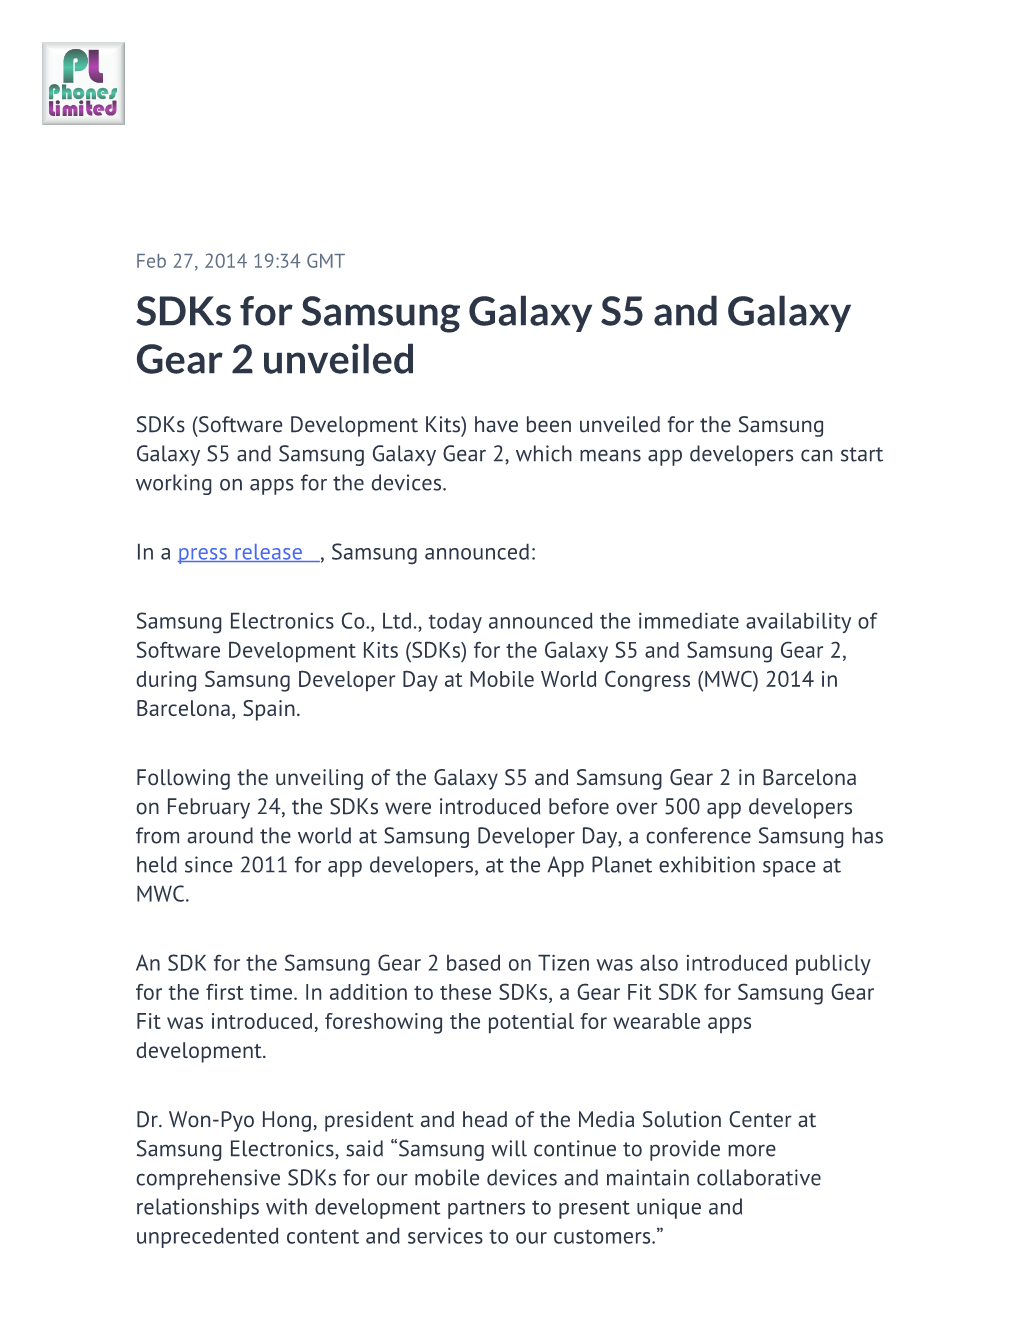 Sdks for Samsung Galaxy S5 and Galaxy Gear 2 Unveiled